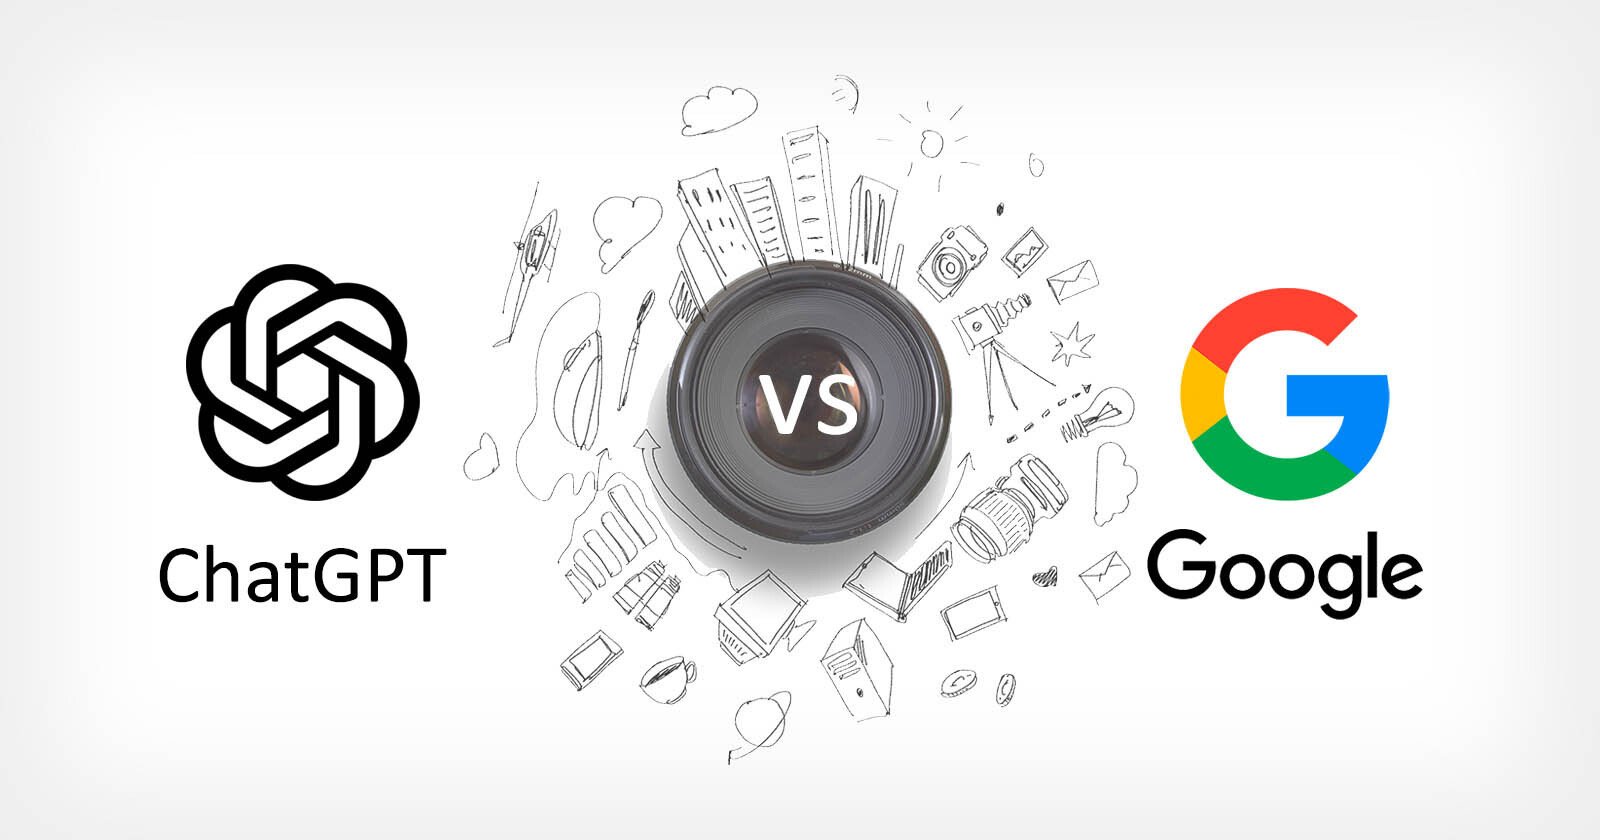  chatgpt google which better answering photography questions 